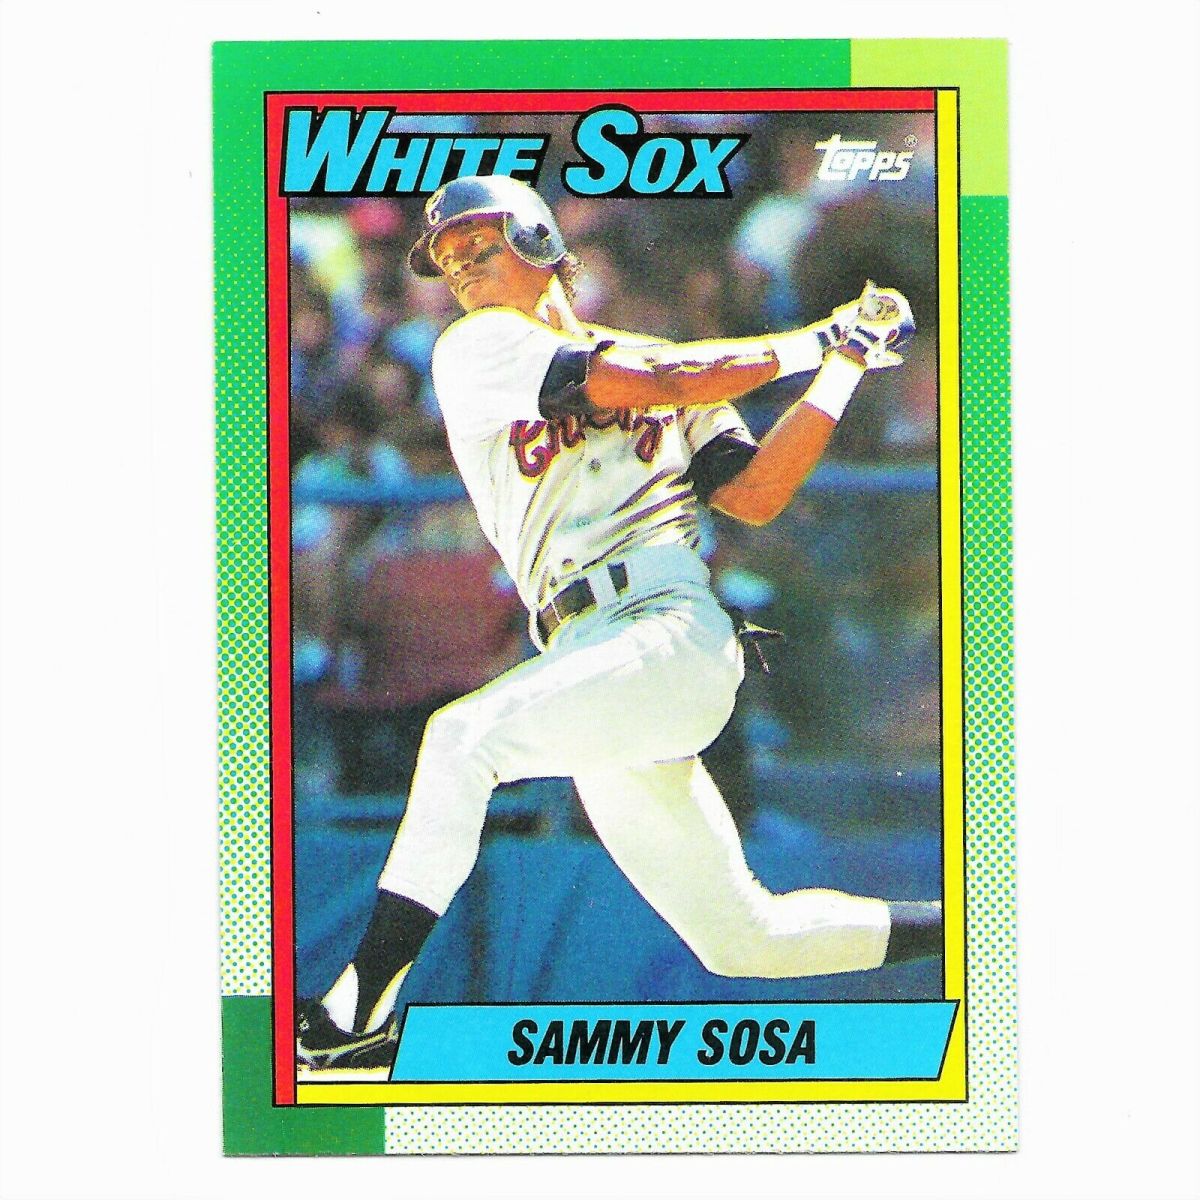 World's largest Sammy Sosa card collection   Sports Collectors Digest